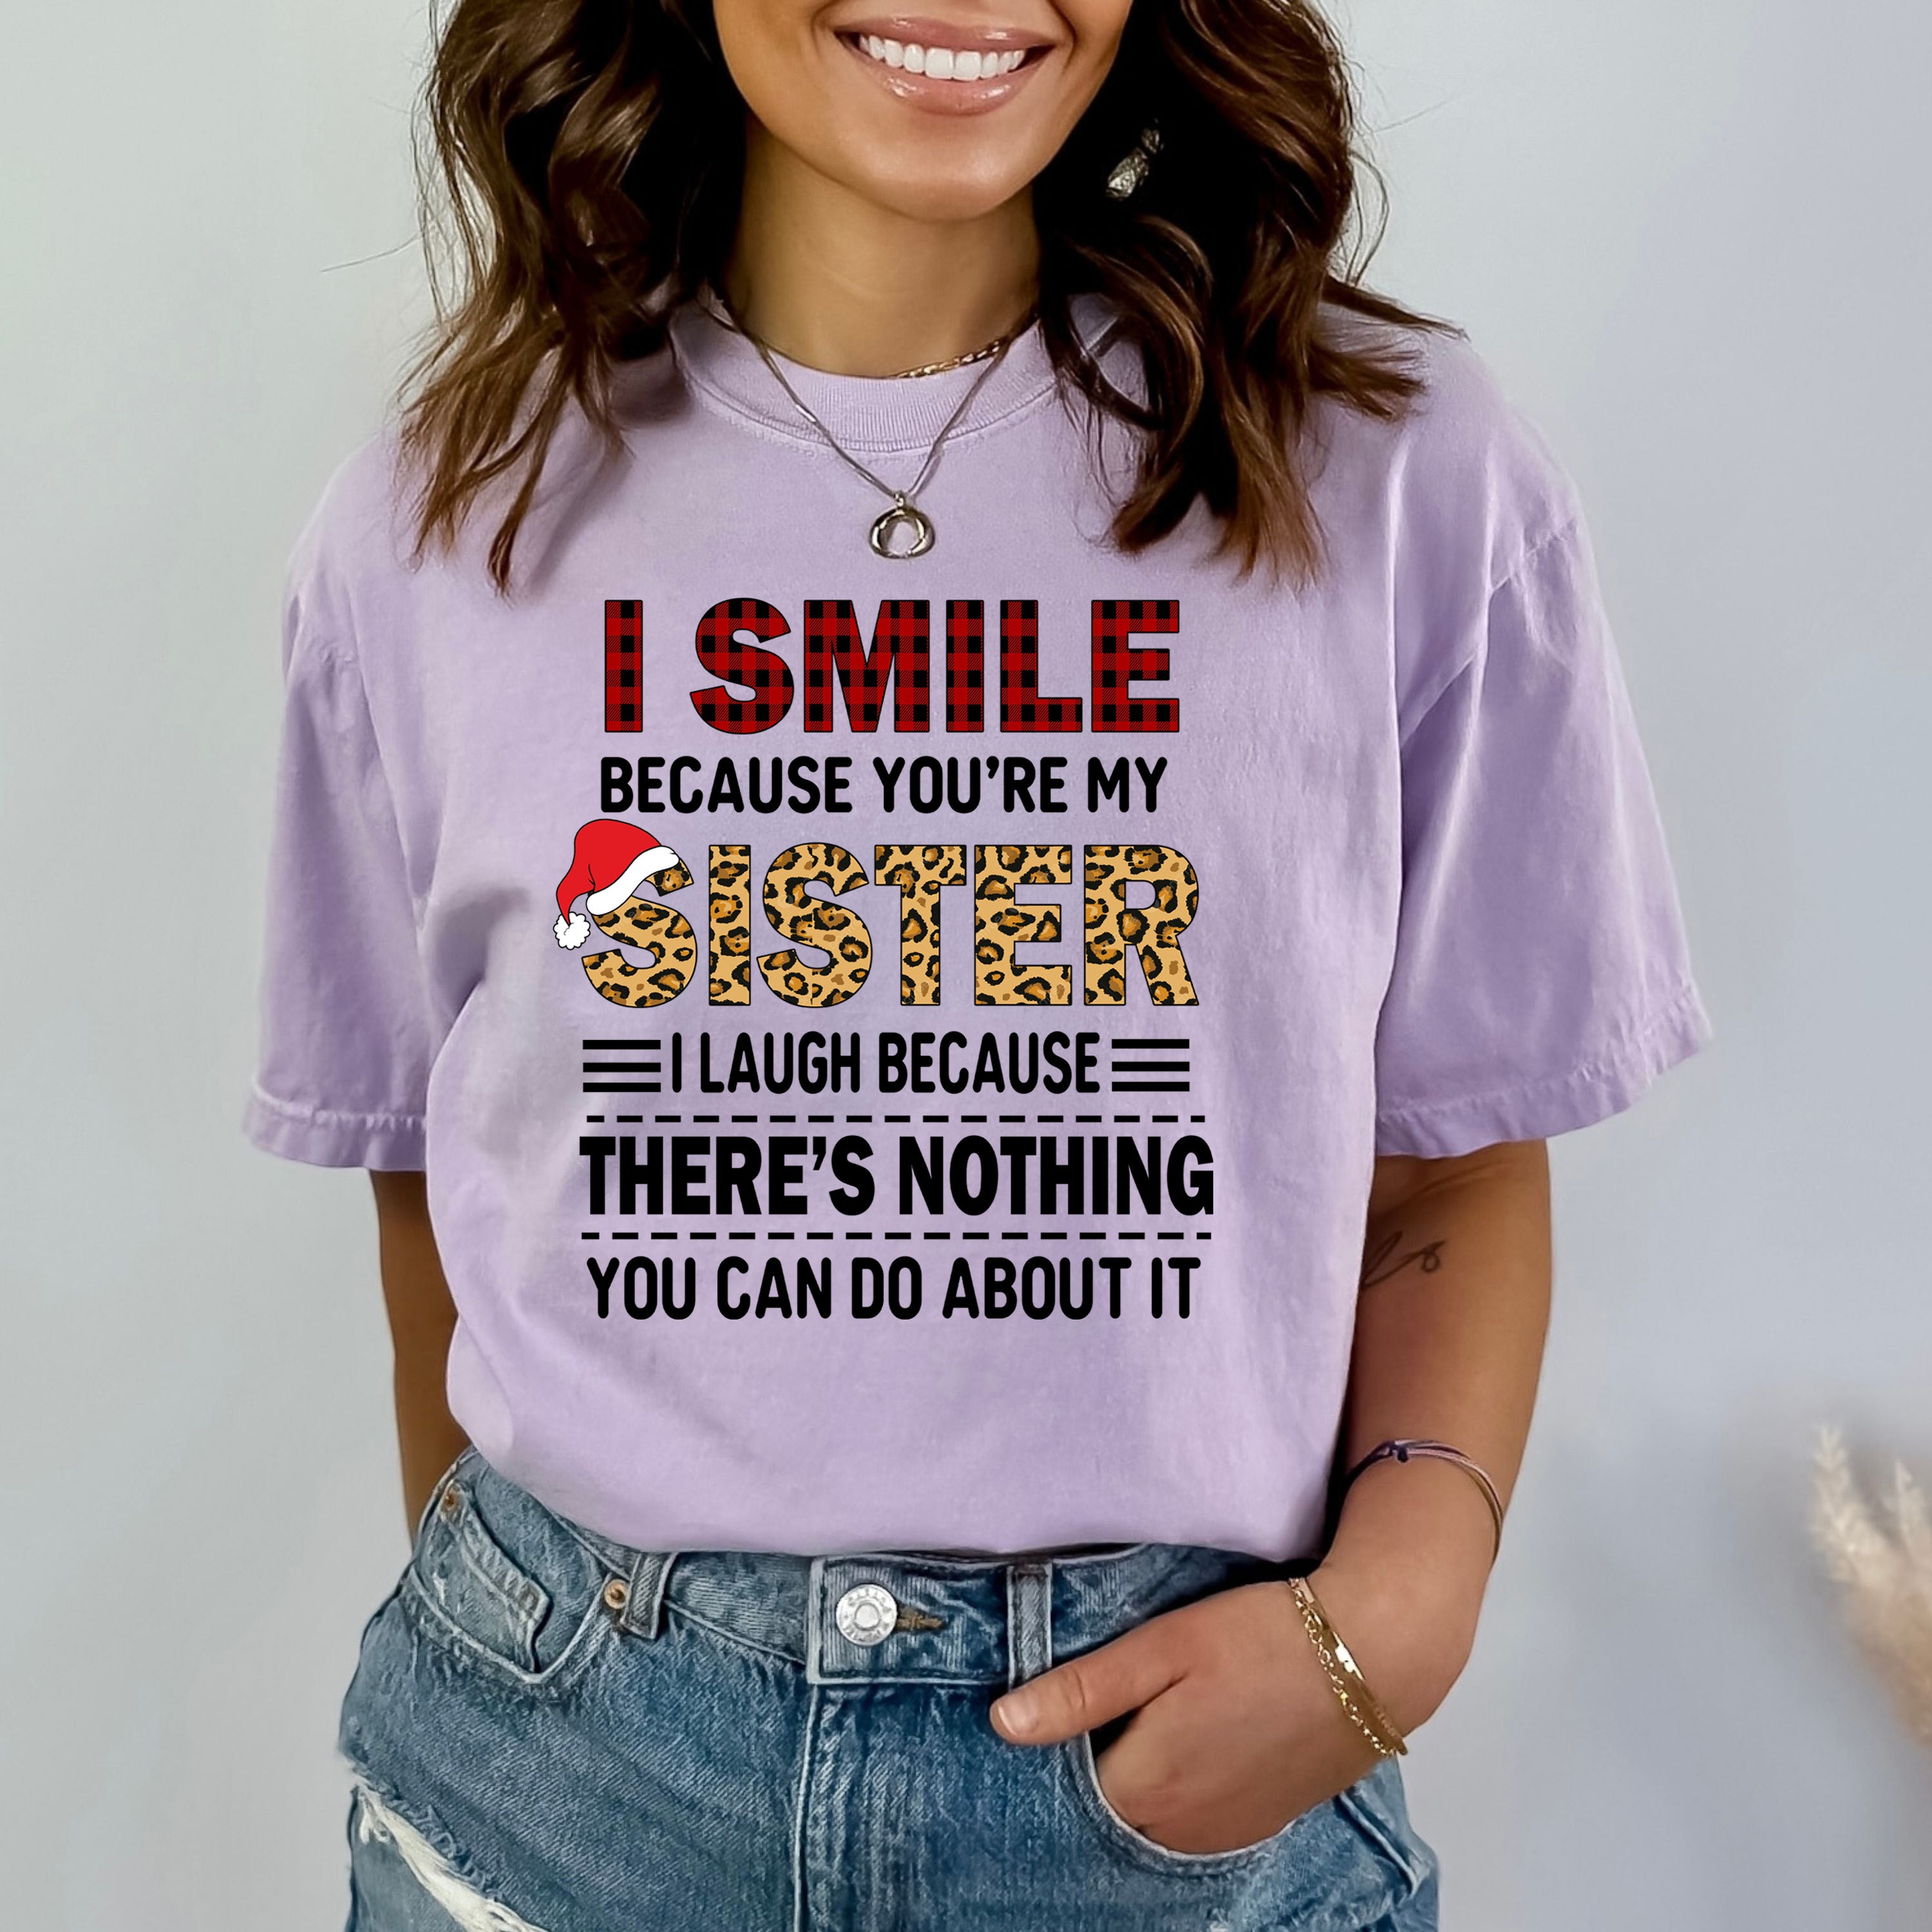 I Smile Because You're My Sister - Bella canvas